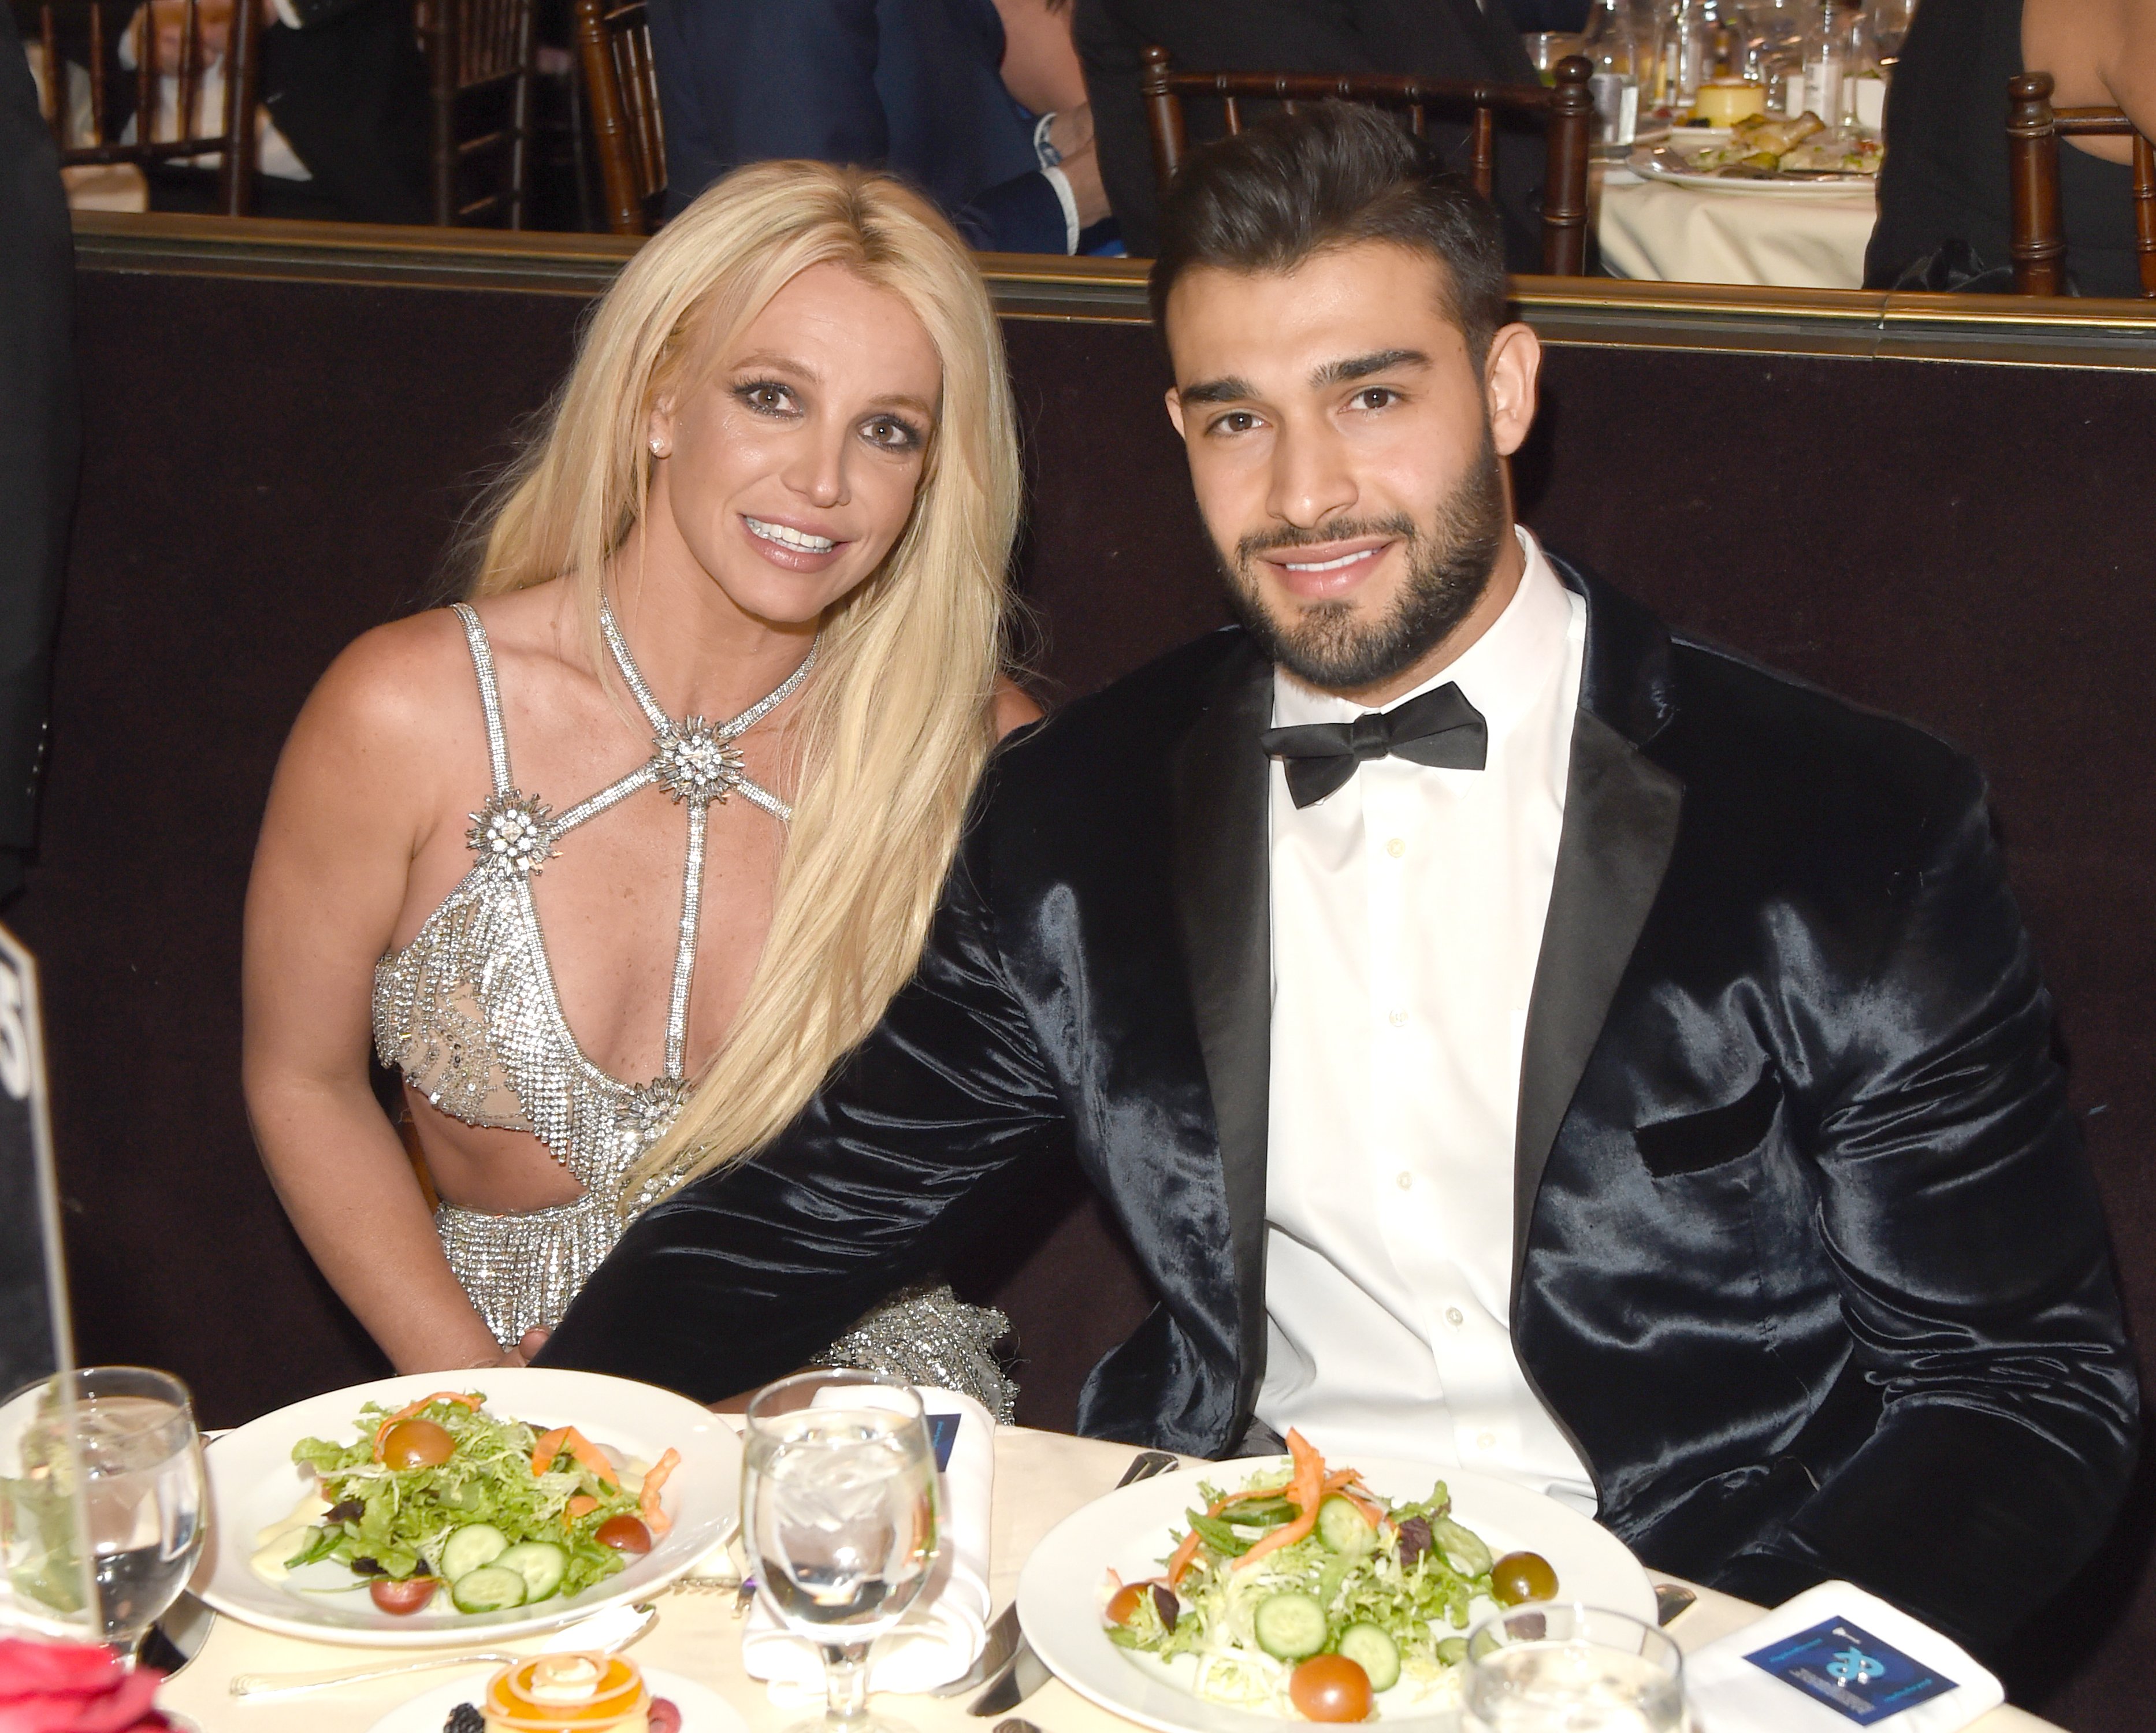 Britney Spears and Sam Asghari pictured at the 29th Annual GLAAD Media Awards at The Beverly Hilton Hotel, 2018, California. | Photo: Getty Images